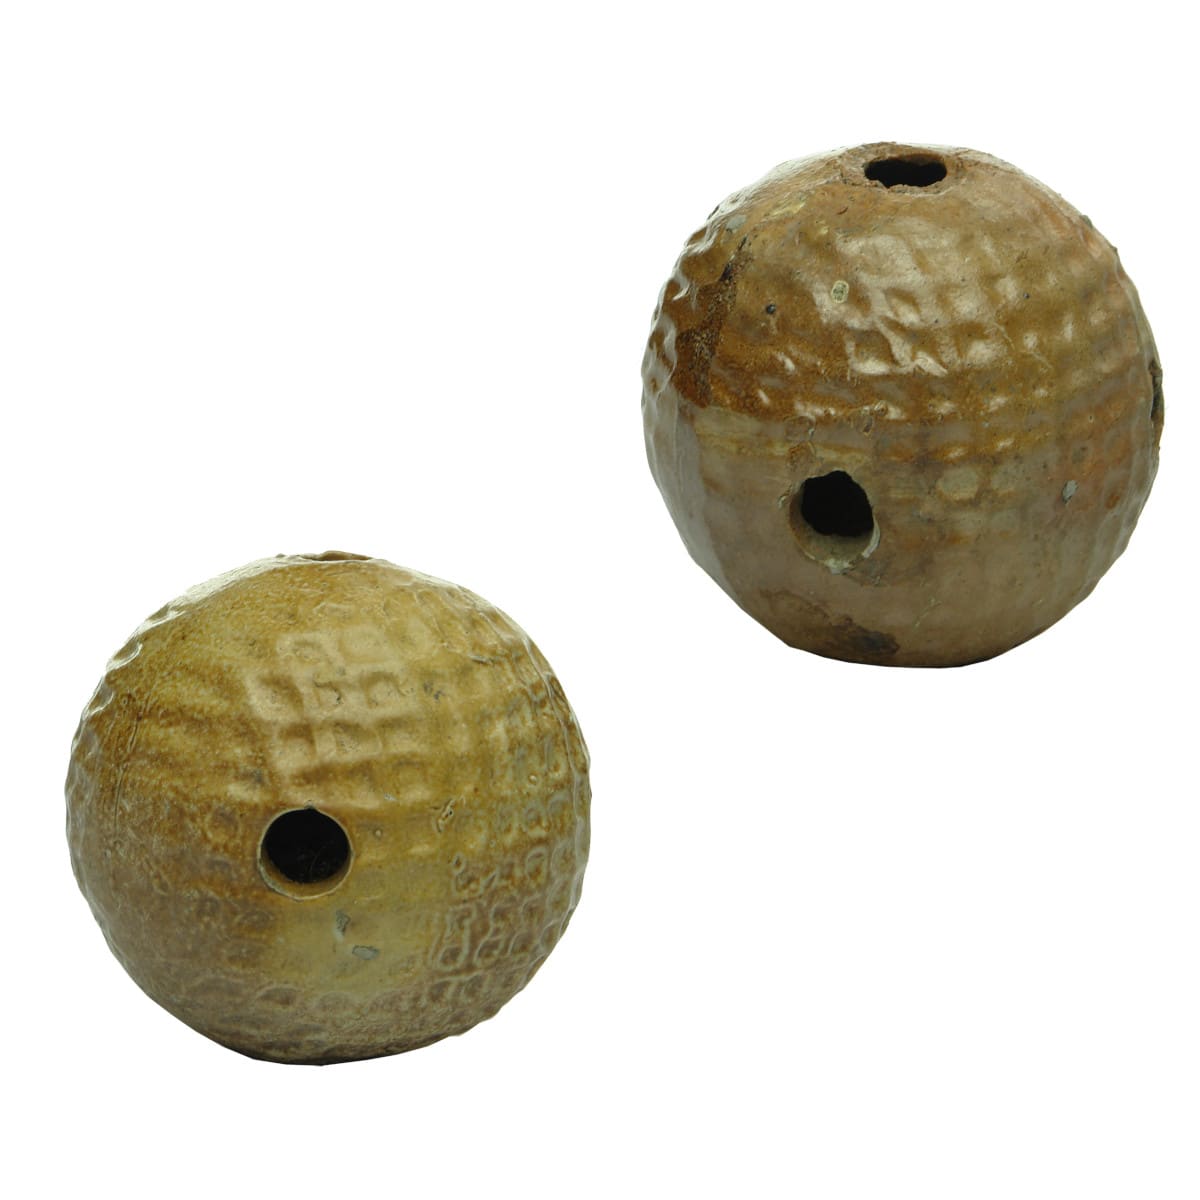 Pair of Ceramic Balls. Almost like golf balls. Holes around top and bottom and four around the middle.